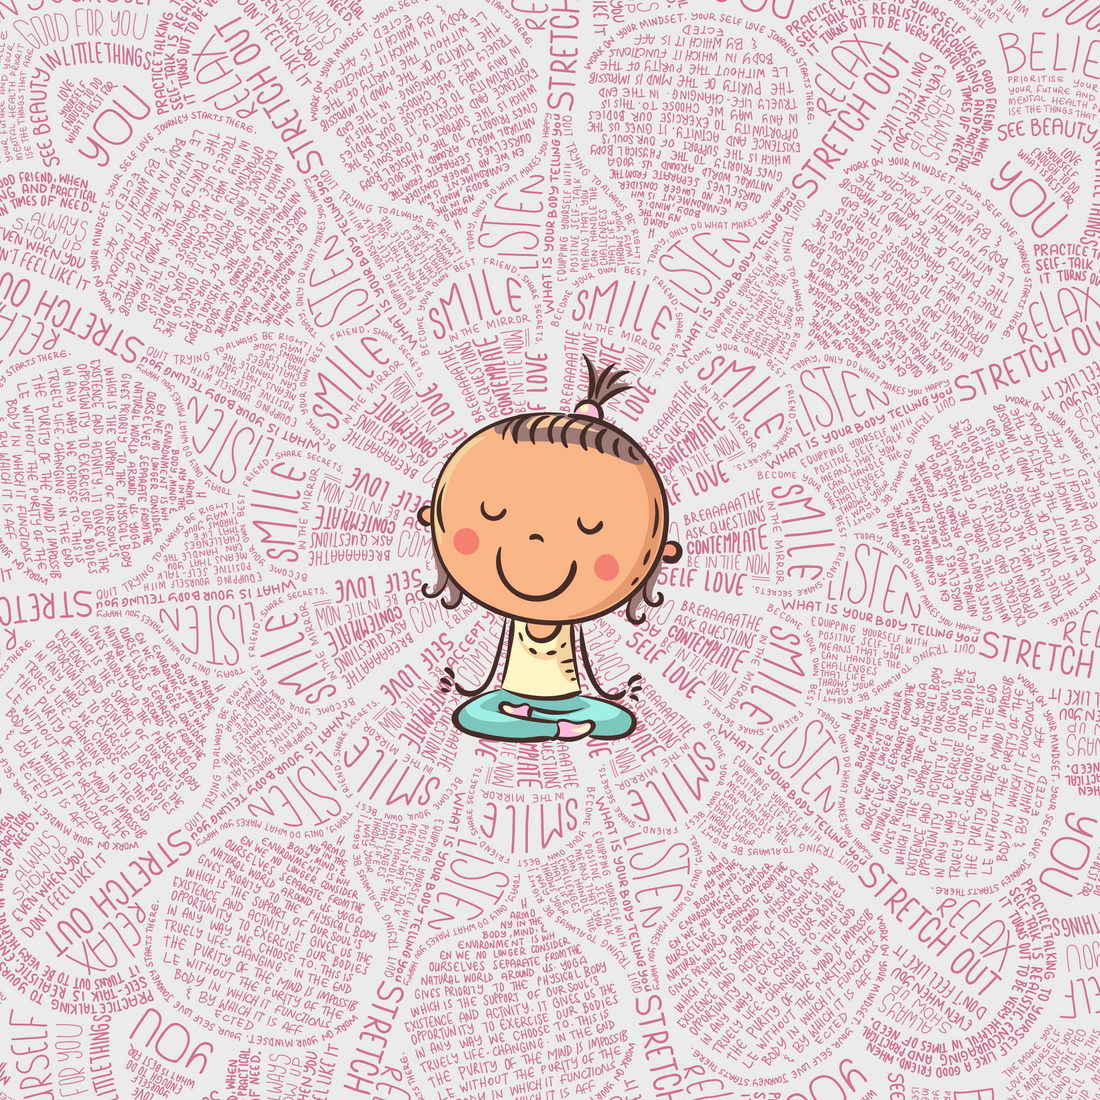 Meditation for Kids: Benefits, Tips, and 5 Creative Routines